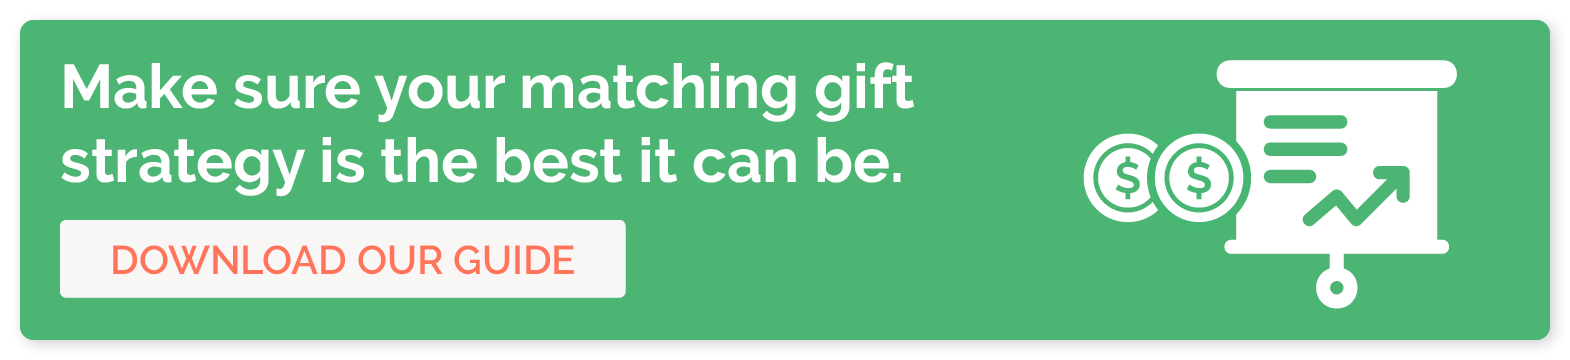 Make sure matching gift strategy is the best it can be. Download our guide. 